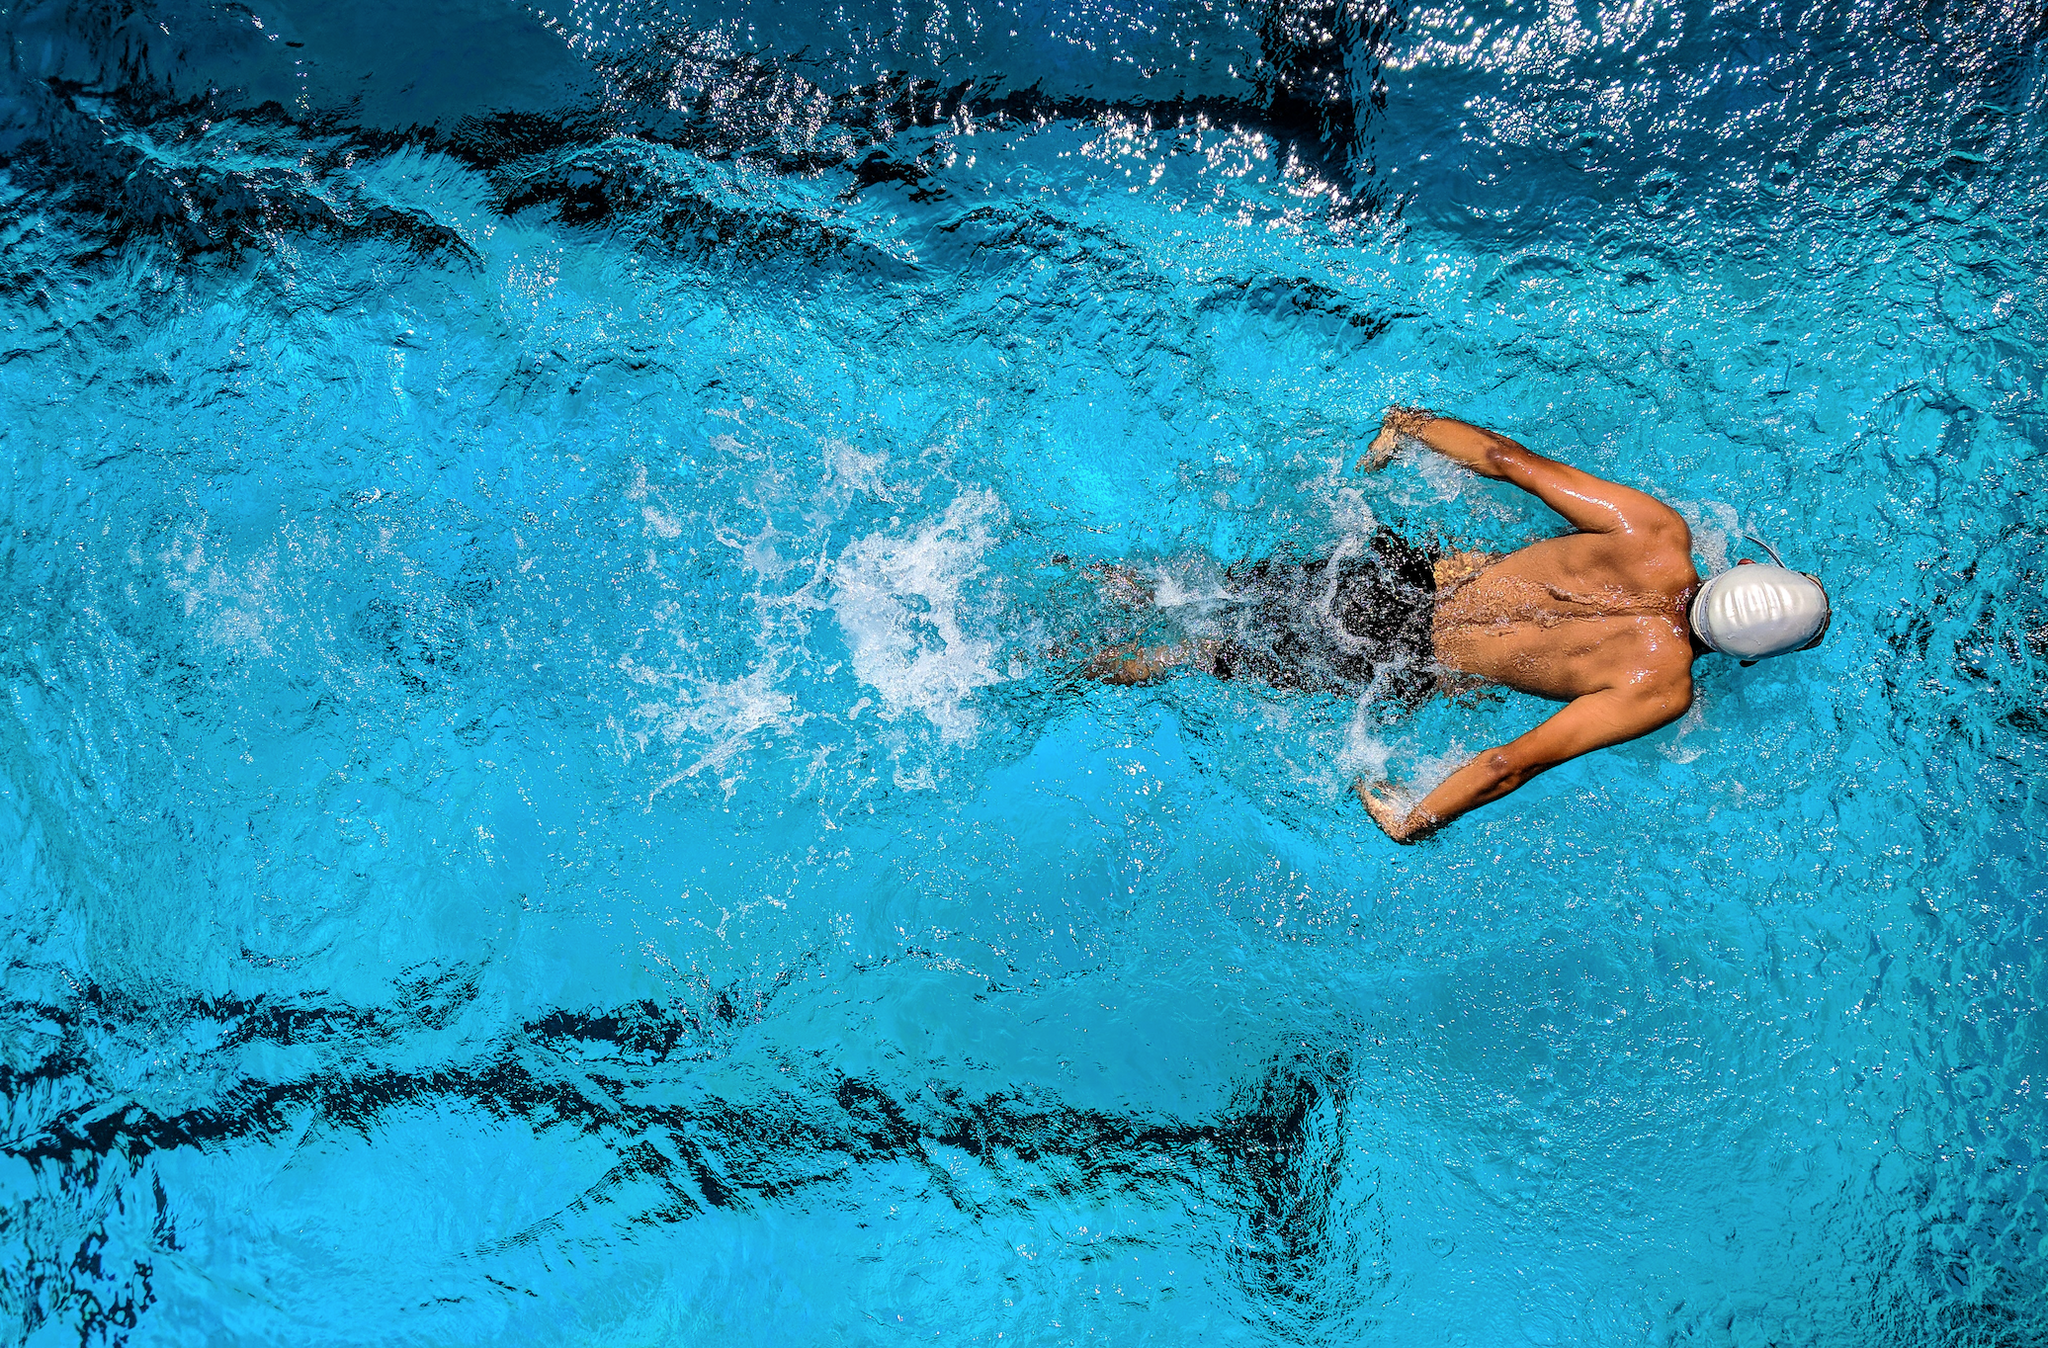 Male triathlete displaying intense focus and impressive endurance while swimming, thanks to a well-balanced marathon nutrition diet